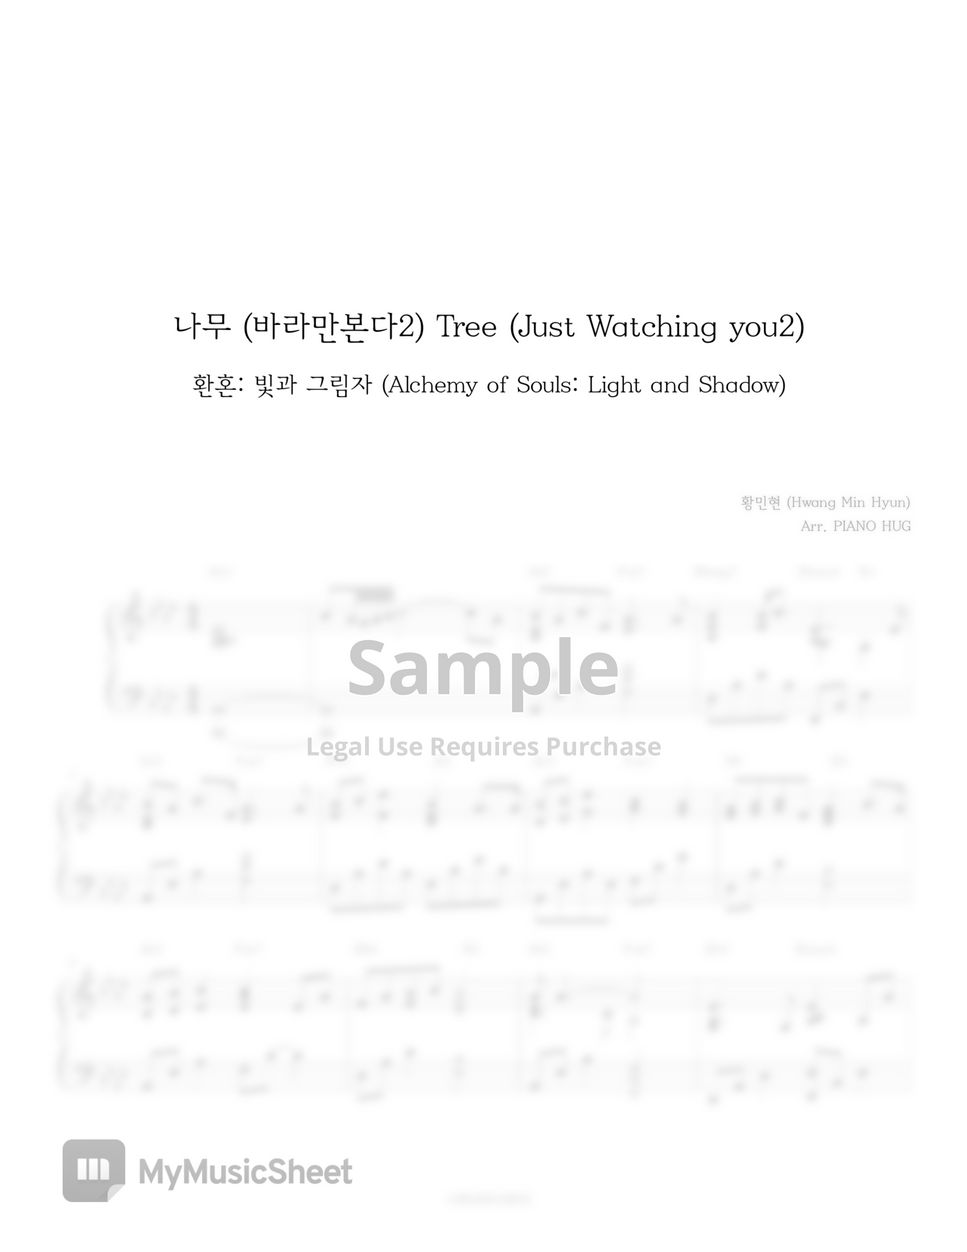 Hwang Min Hyun (NU'EST) - Tree (Just Watching You2) (Alchemy of Souls2, Light and Shadow OST) by Piano Hug